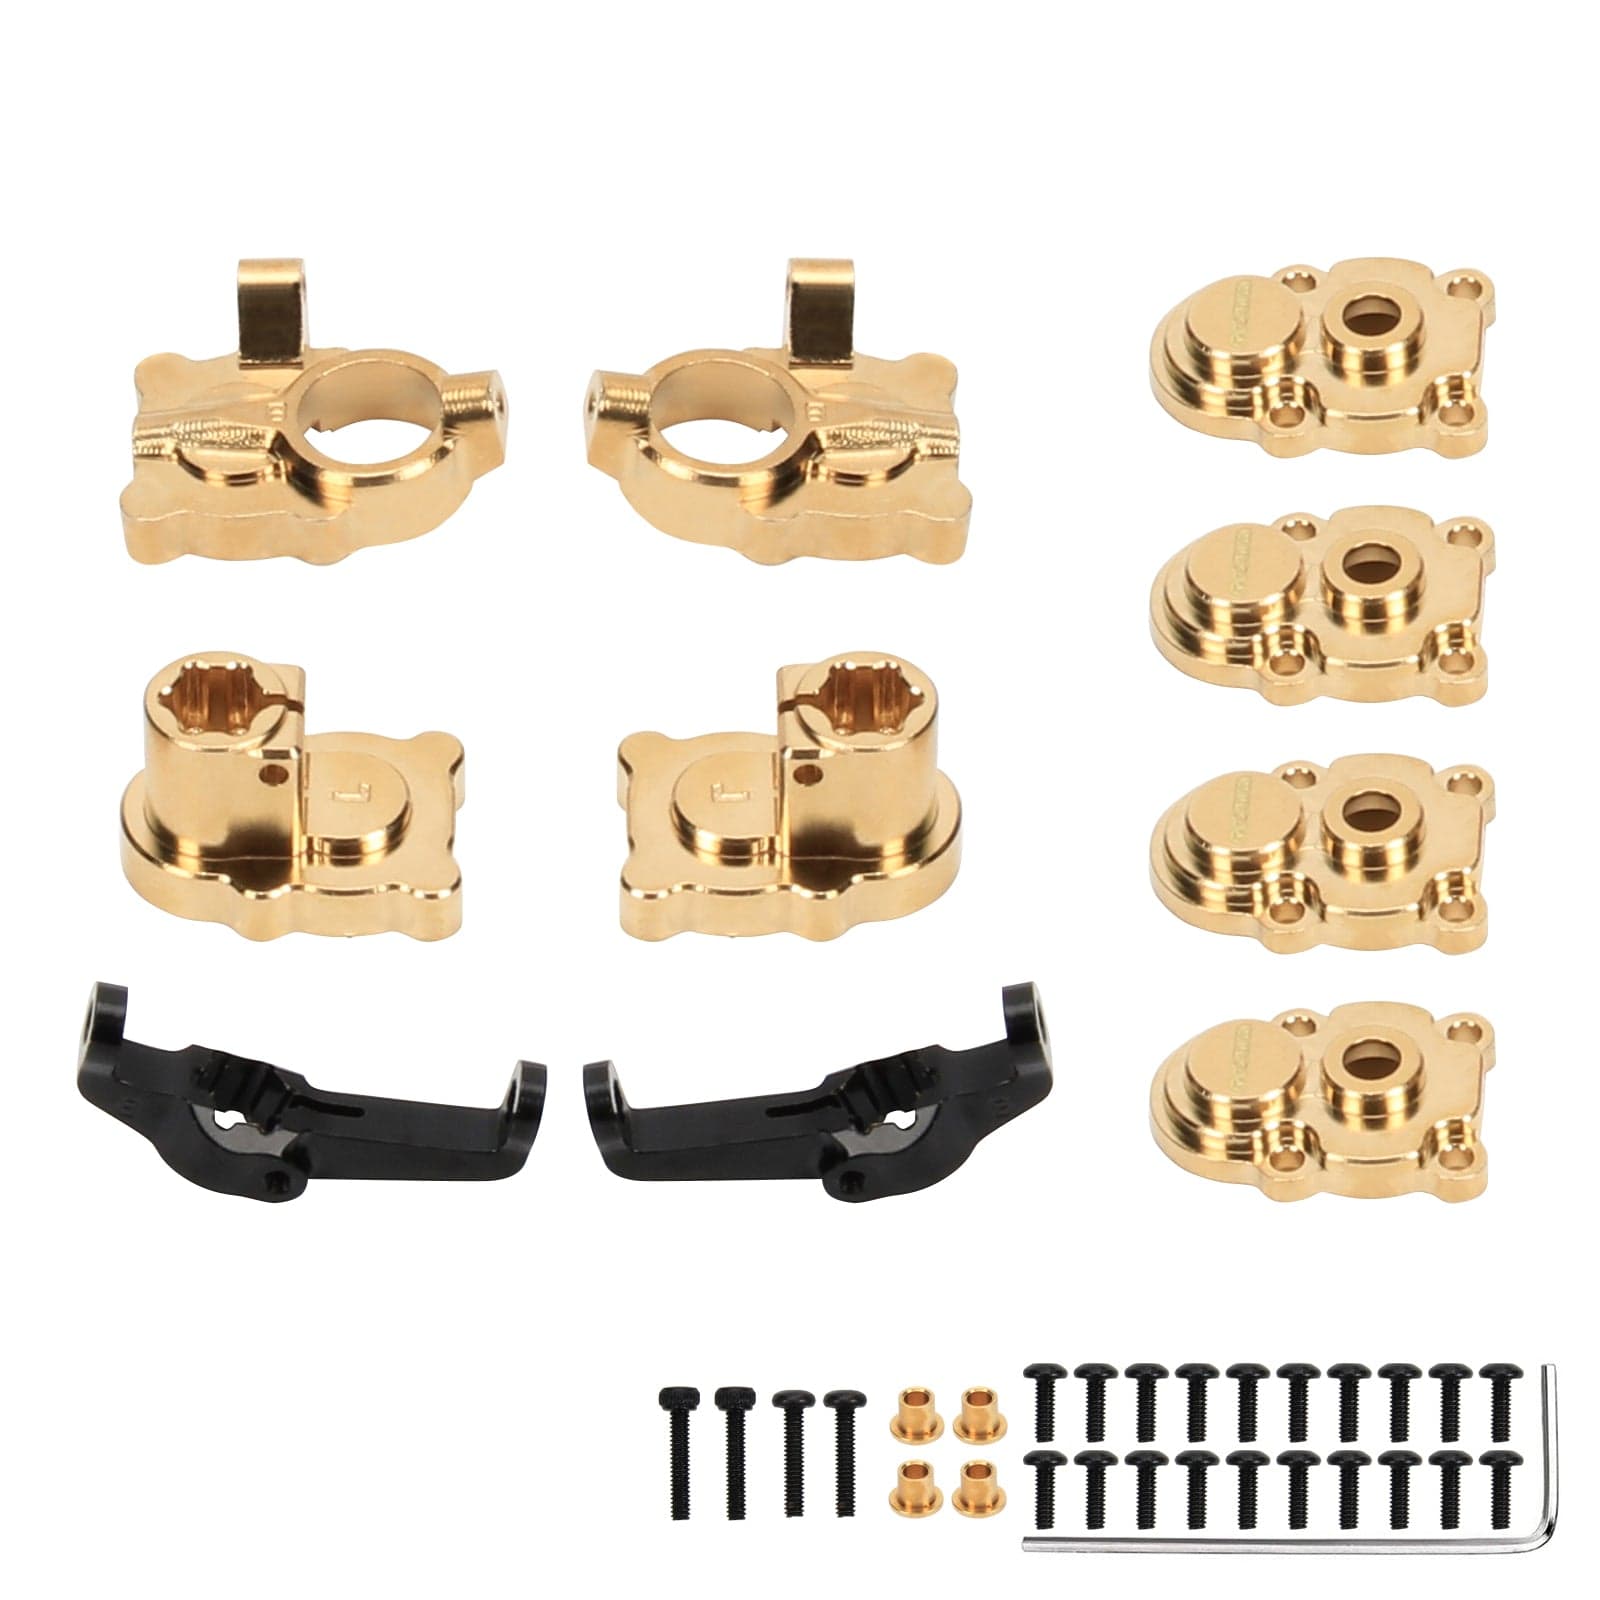 RCAWD FMS FCX24 RCAWD FMS FCX24 Upgrades Brass Front and Rear Alloy Axles Housing Full Set D3-C3017